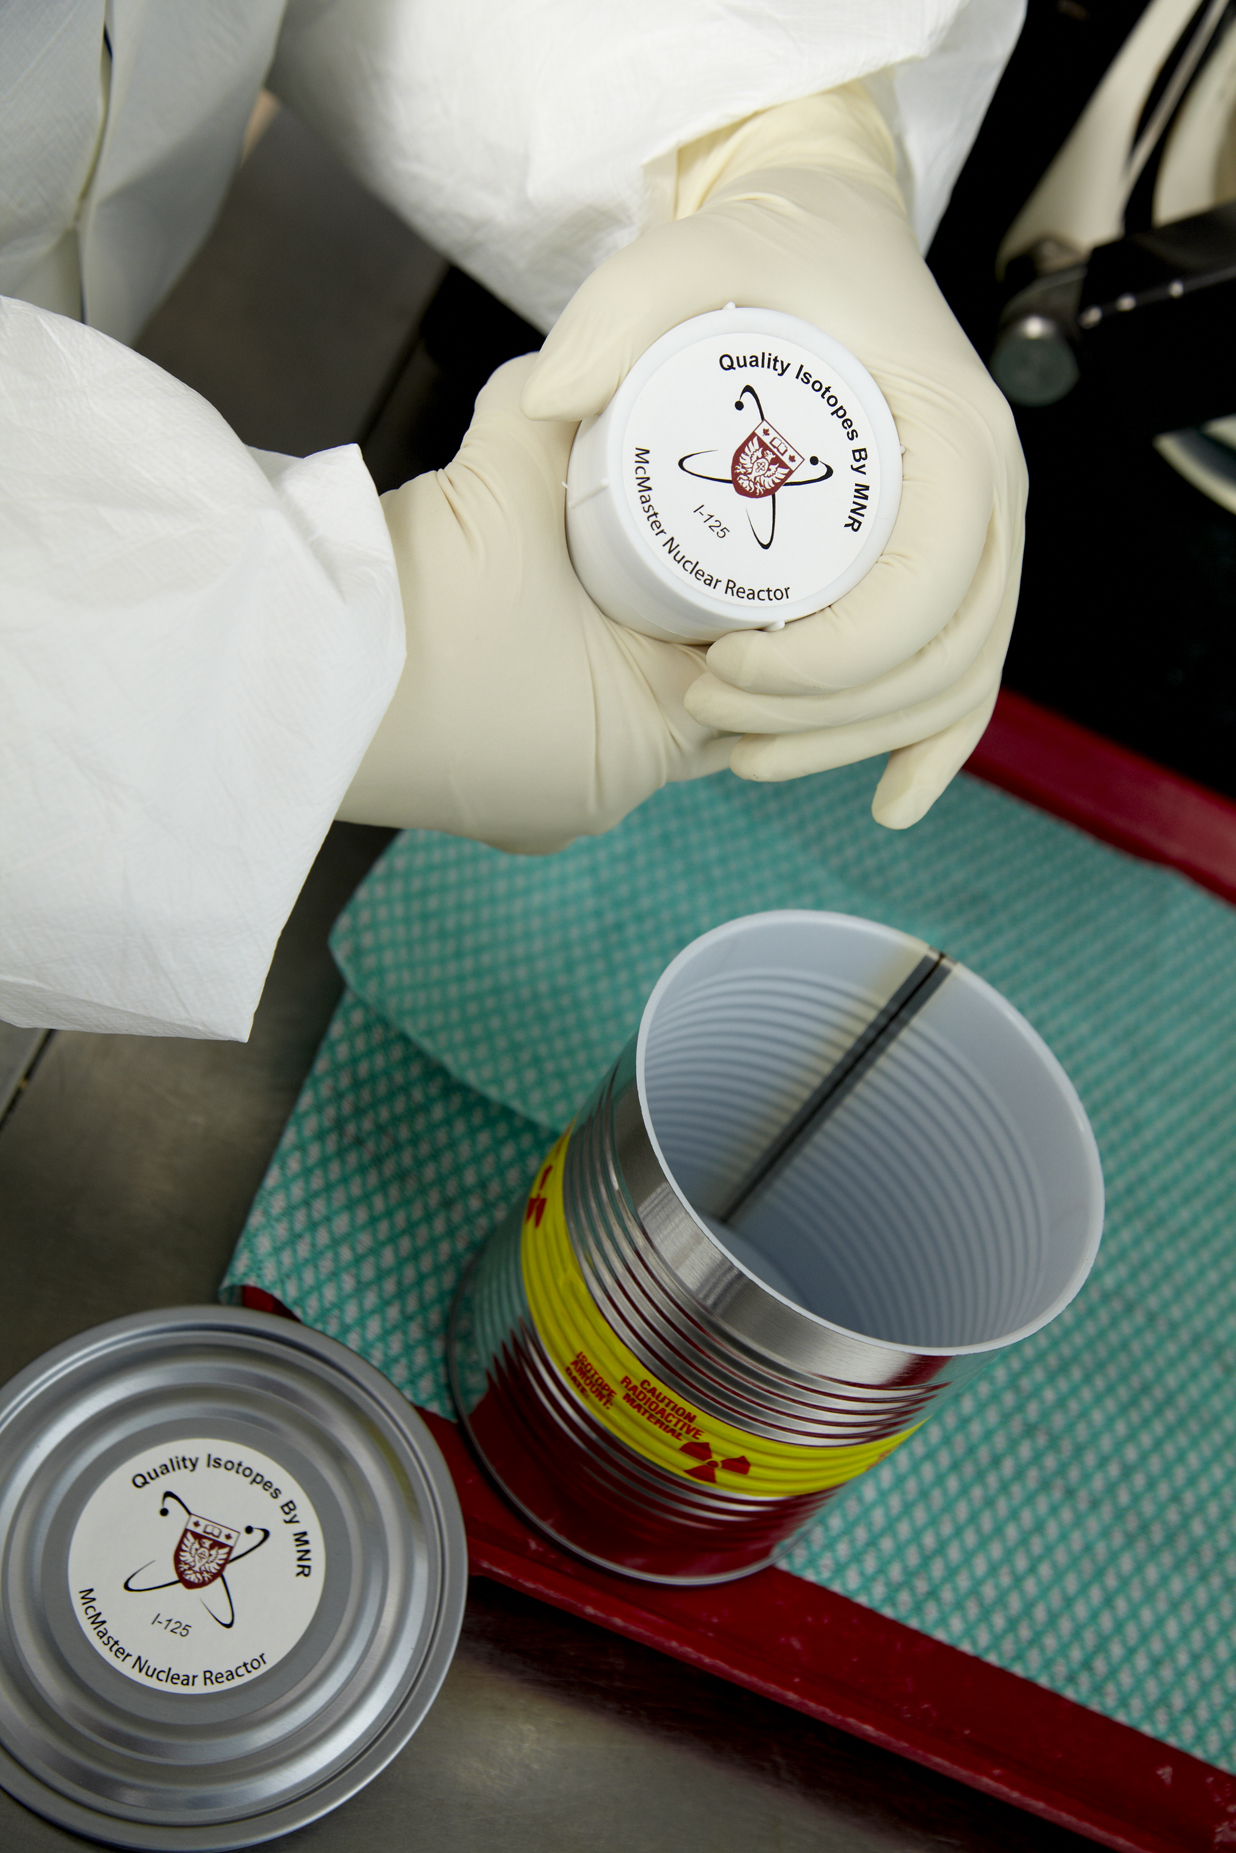 A technician holds a bottle containing medical isotope iodine-125.